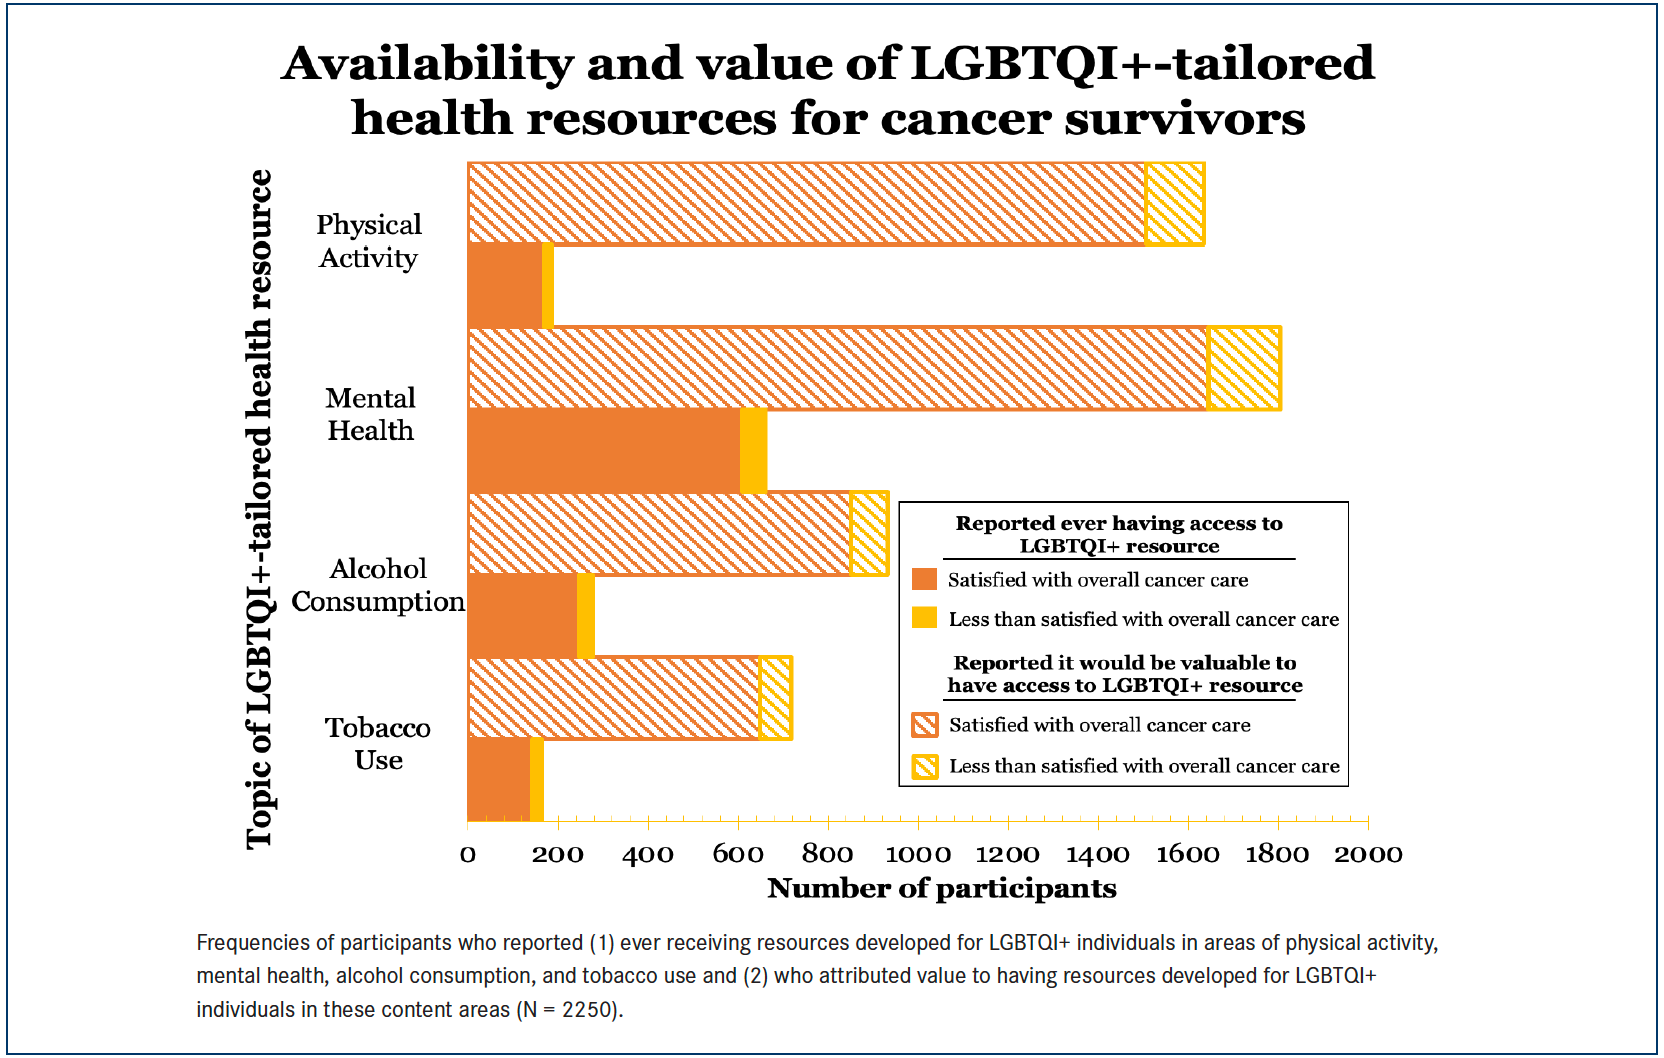 Figure. Availability and Value of Health Resources for LGBTQI+ Cancer Survivors3